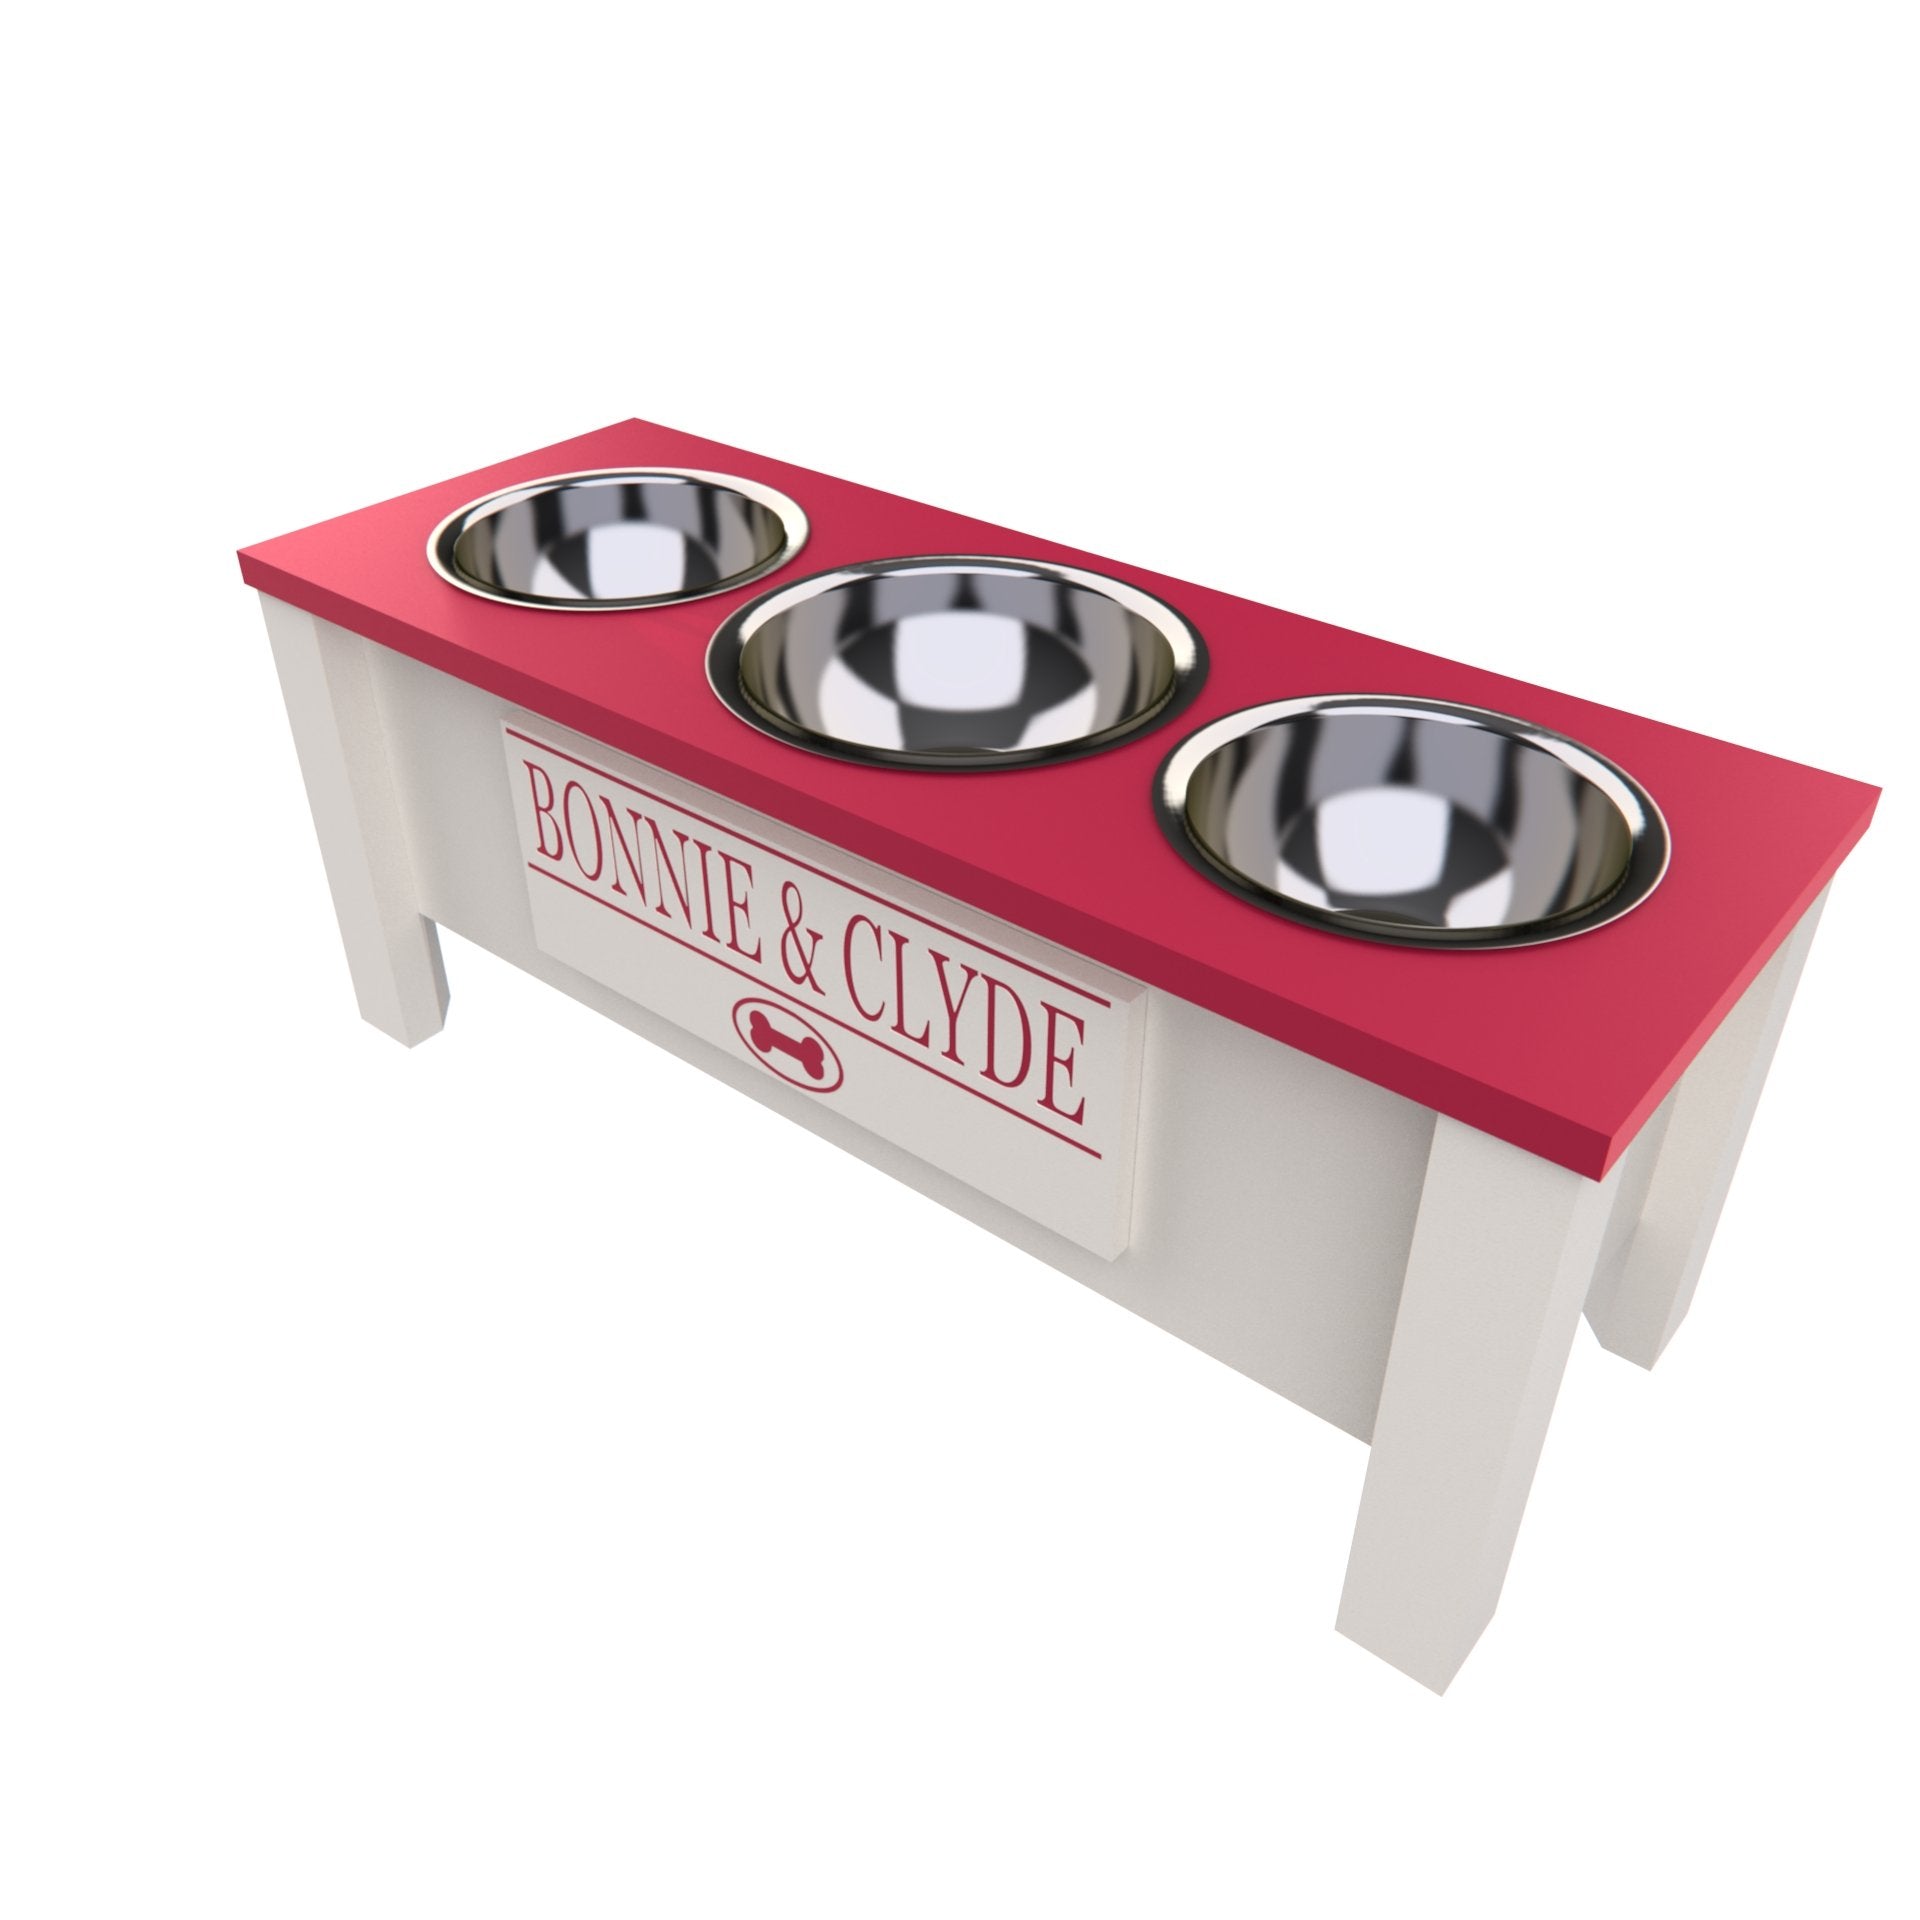 Personalized 3 Bowl Elevated Dog Feeder in Magenta - GrooveThis Woodshop - GT006MAG-L